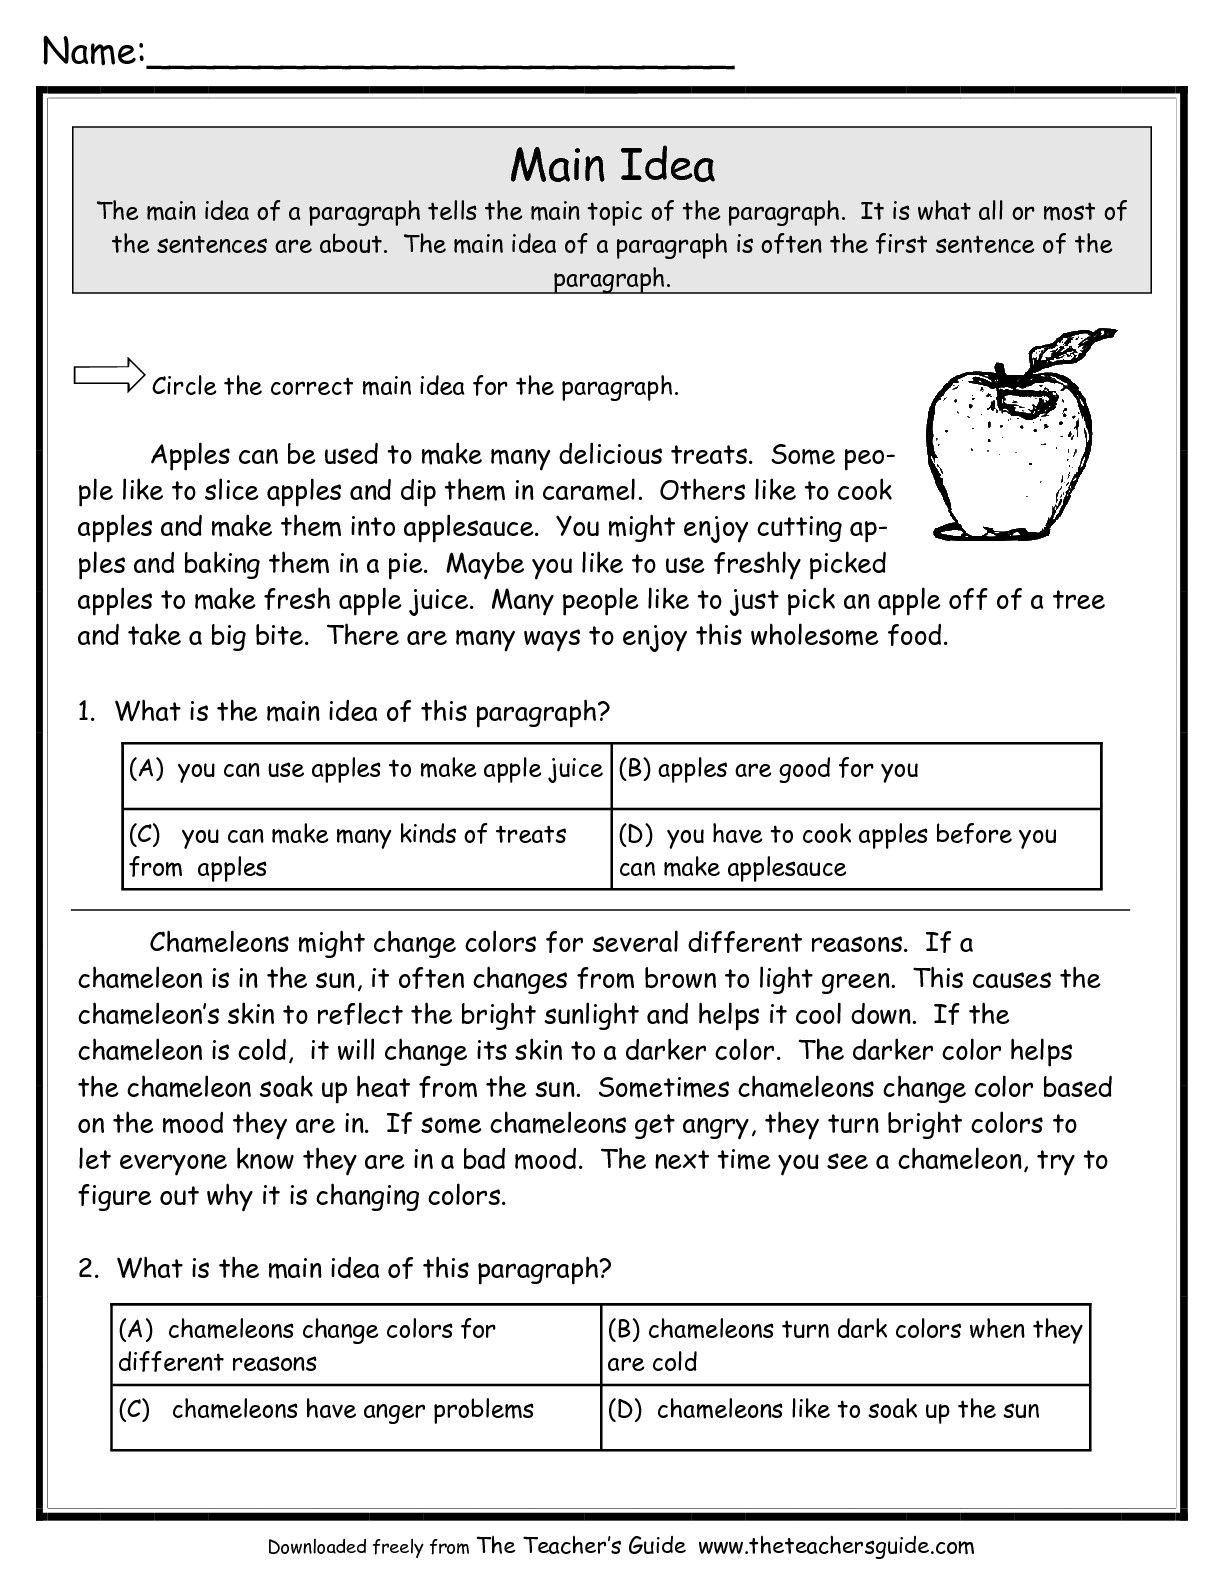 10 Unique Third Grade Main Idea Worksheets main idea worksheets from the teachers guide resources for work 6 2023